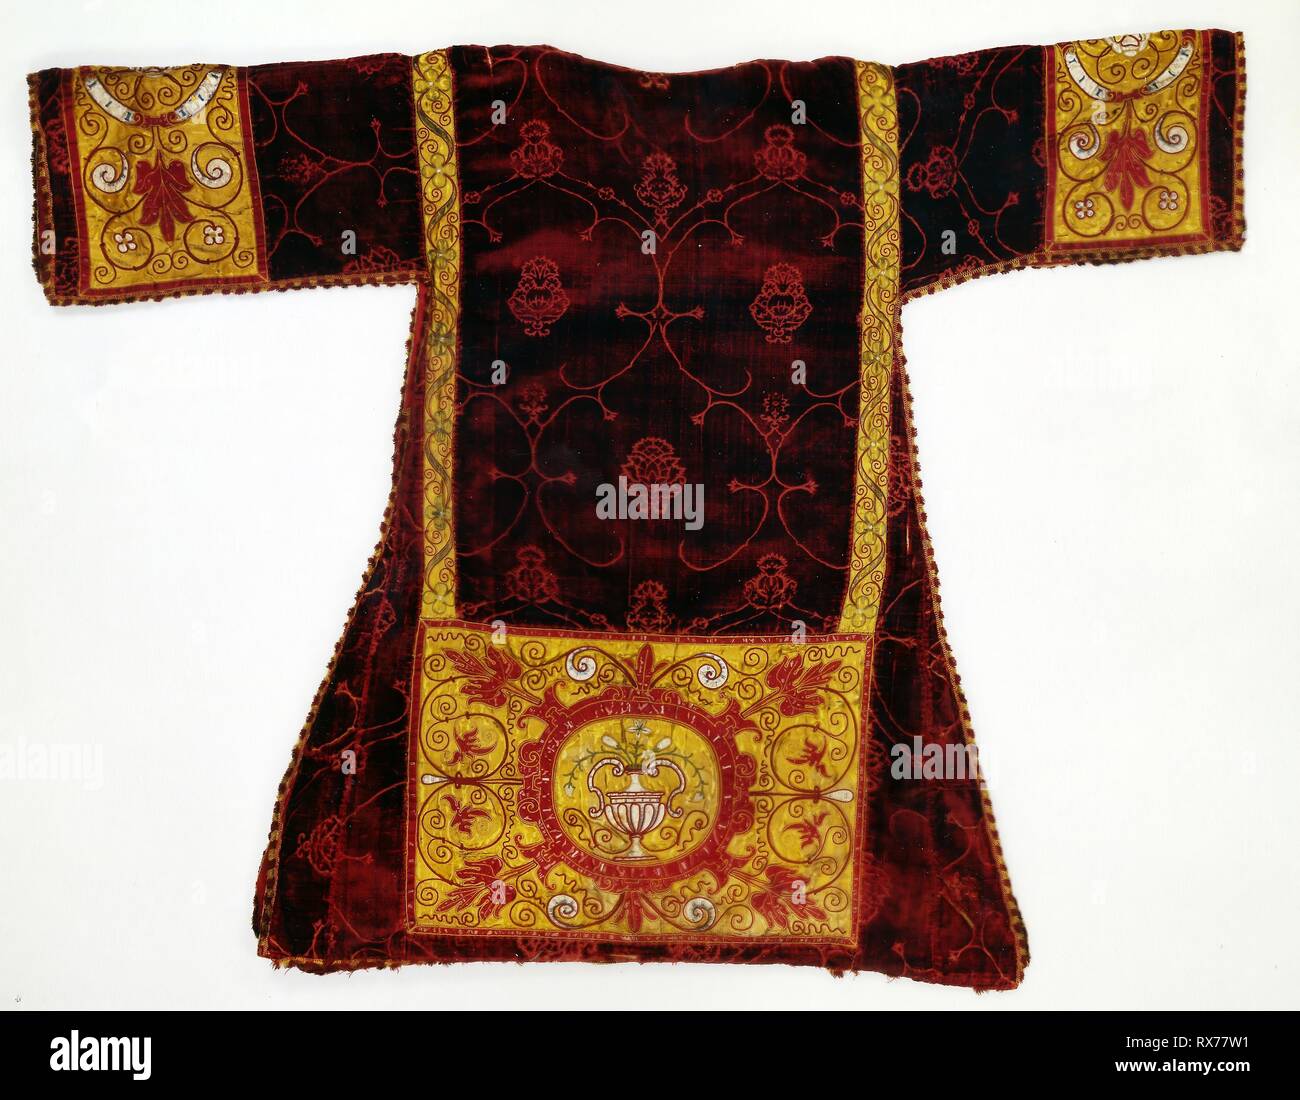 Dalmatic. Italy. Date: 1475-1500. Dimensions: 114.3 x 145.6 cm (45 x 57 1/4 in.)  Velvet repeat: 52.6 x 29.2 cm (20 3/4 x 11 1/2 in.). Silk, warp-float faced 4:1 satin weave with supplementary pile warps forming cut voided velvet; apparels: silk, warp-float faced 7:1 satin weave; appliquéd with warp-float faced 7:1 satin weave; painted; embroidered and appliquéd with silk in laid work and couching; fringe: silk, warp faced plain weave with extended ground weft fringe; lining: cotton, warp-float faced 4:1 satin weave; underlining: hemp. Origin: Italy. Museum: The Chicago Art Institute. Stock Photo